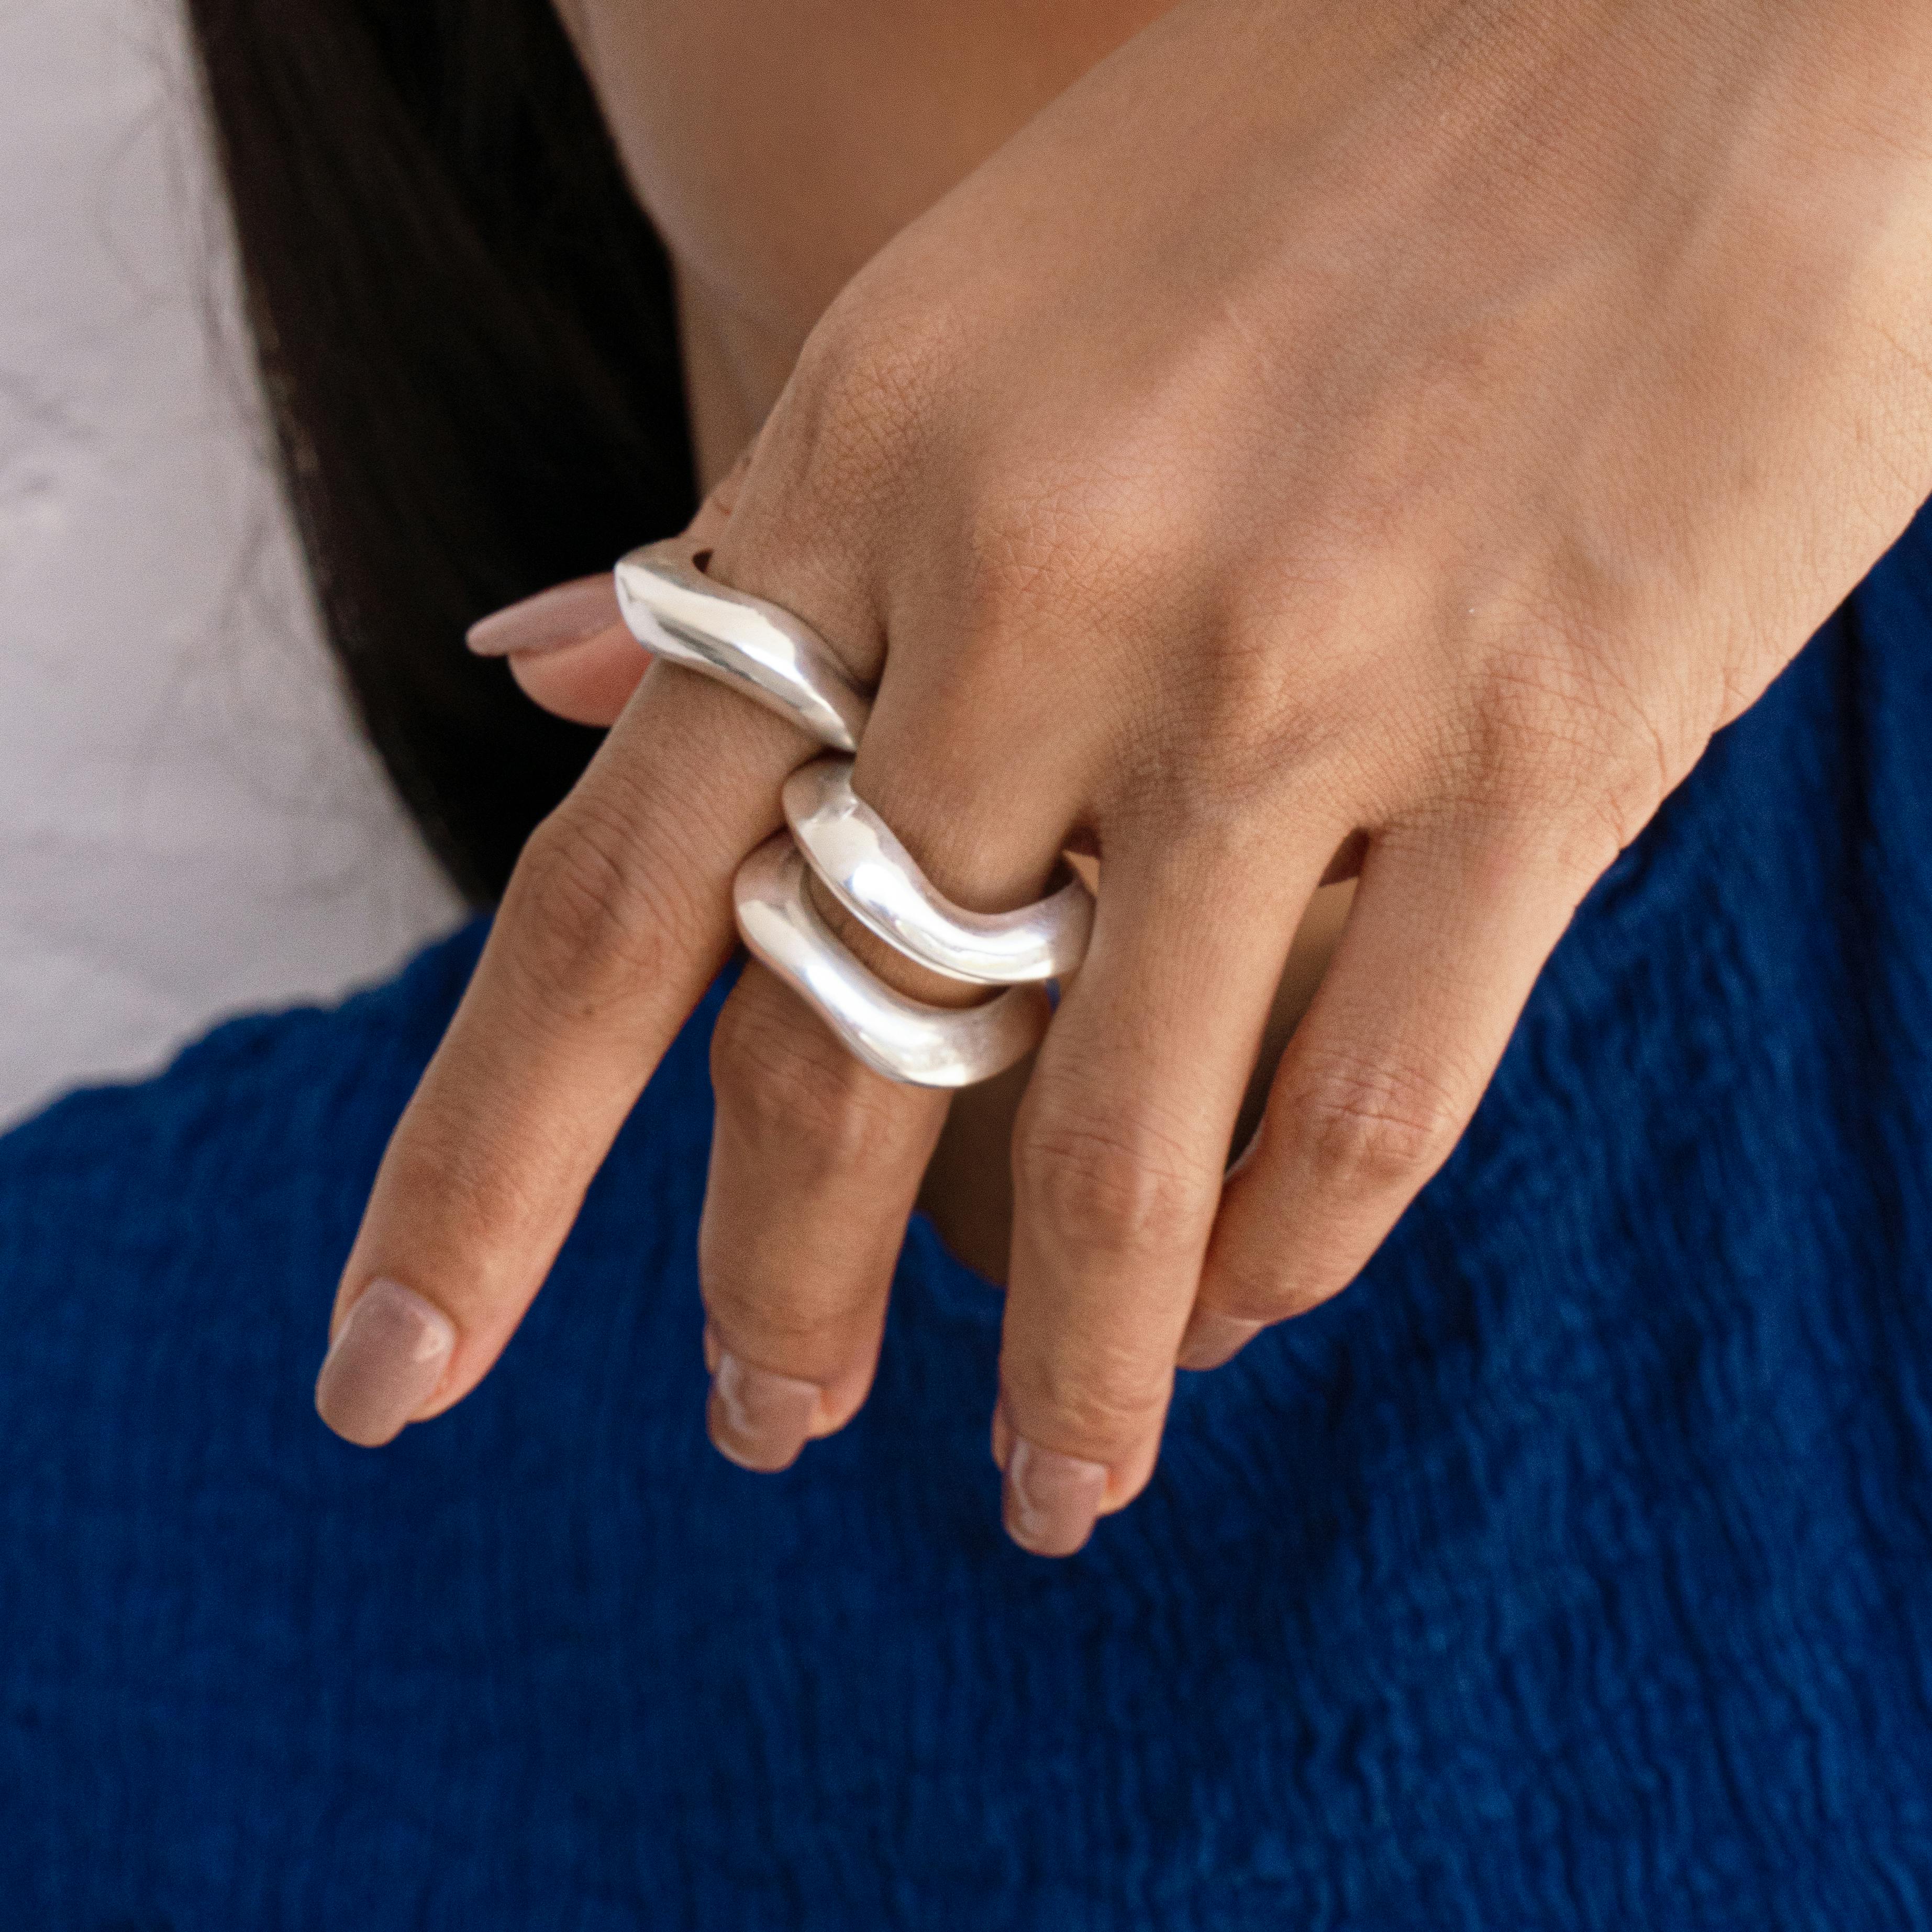 WAVE RING - SILVER TONE, a product by Equiivalence